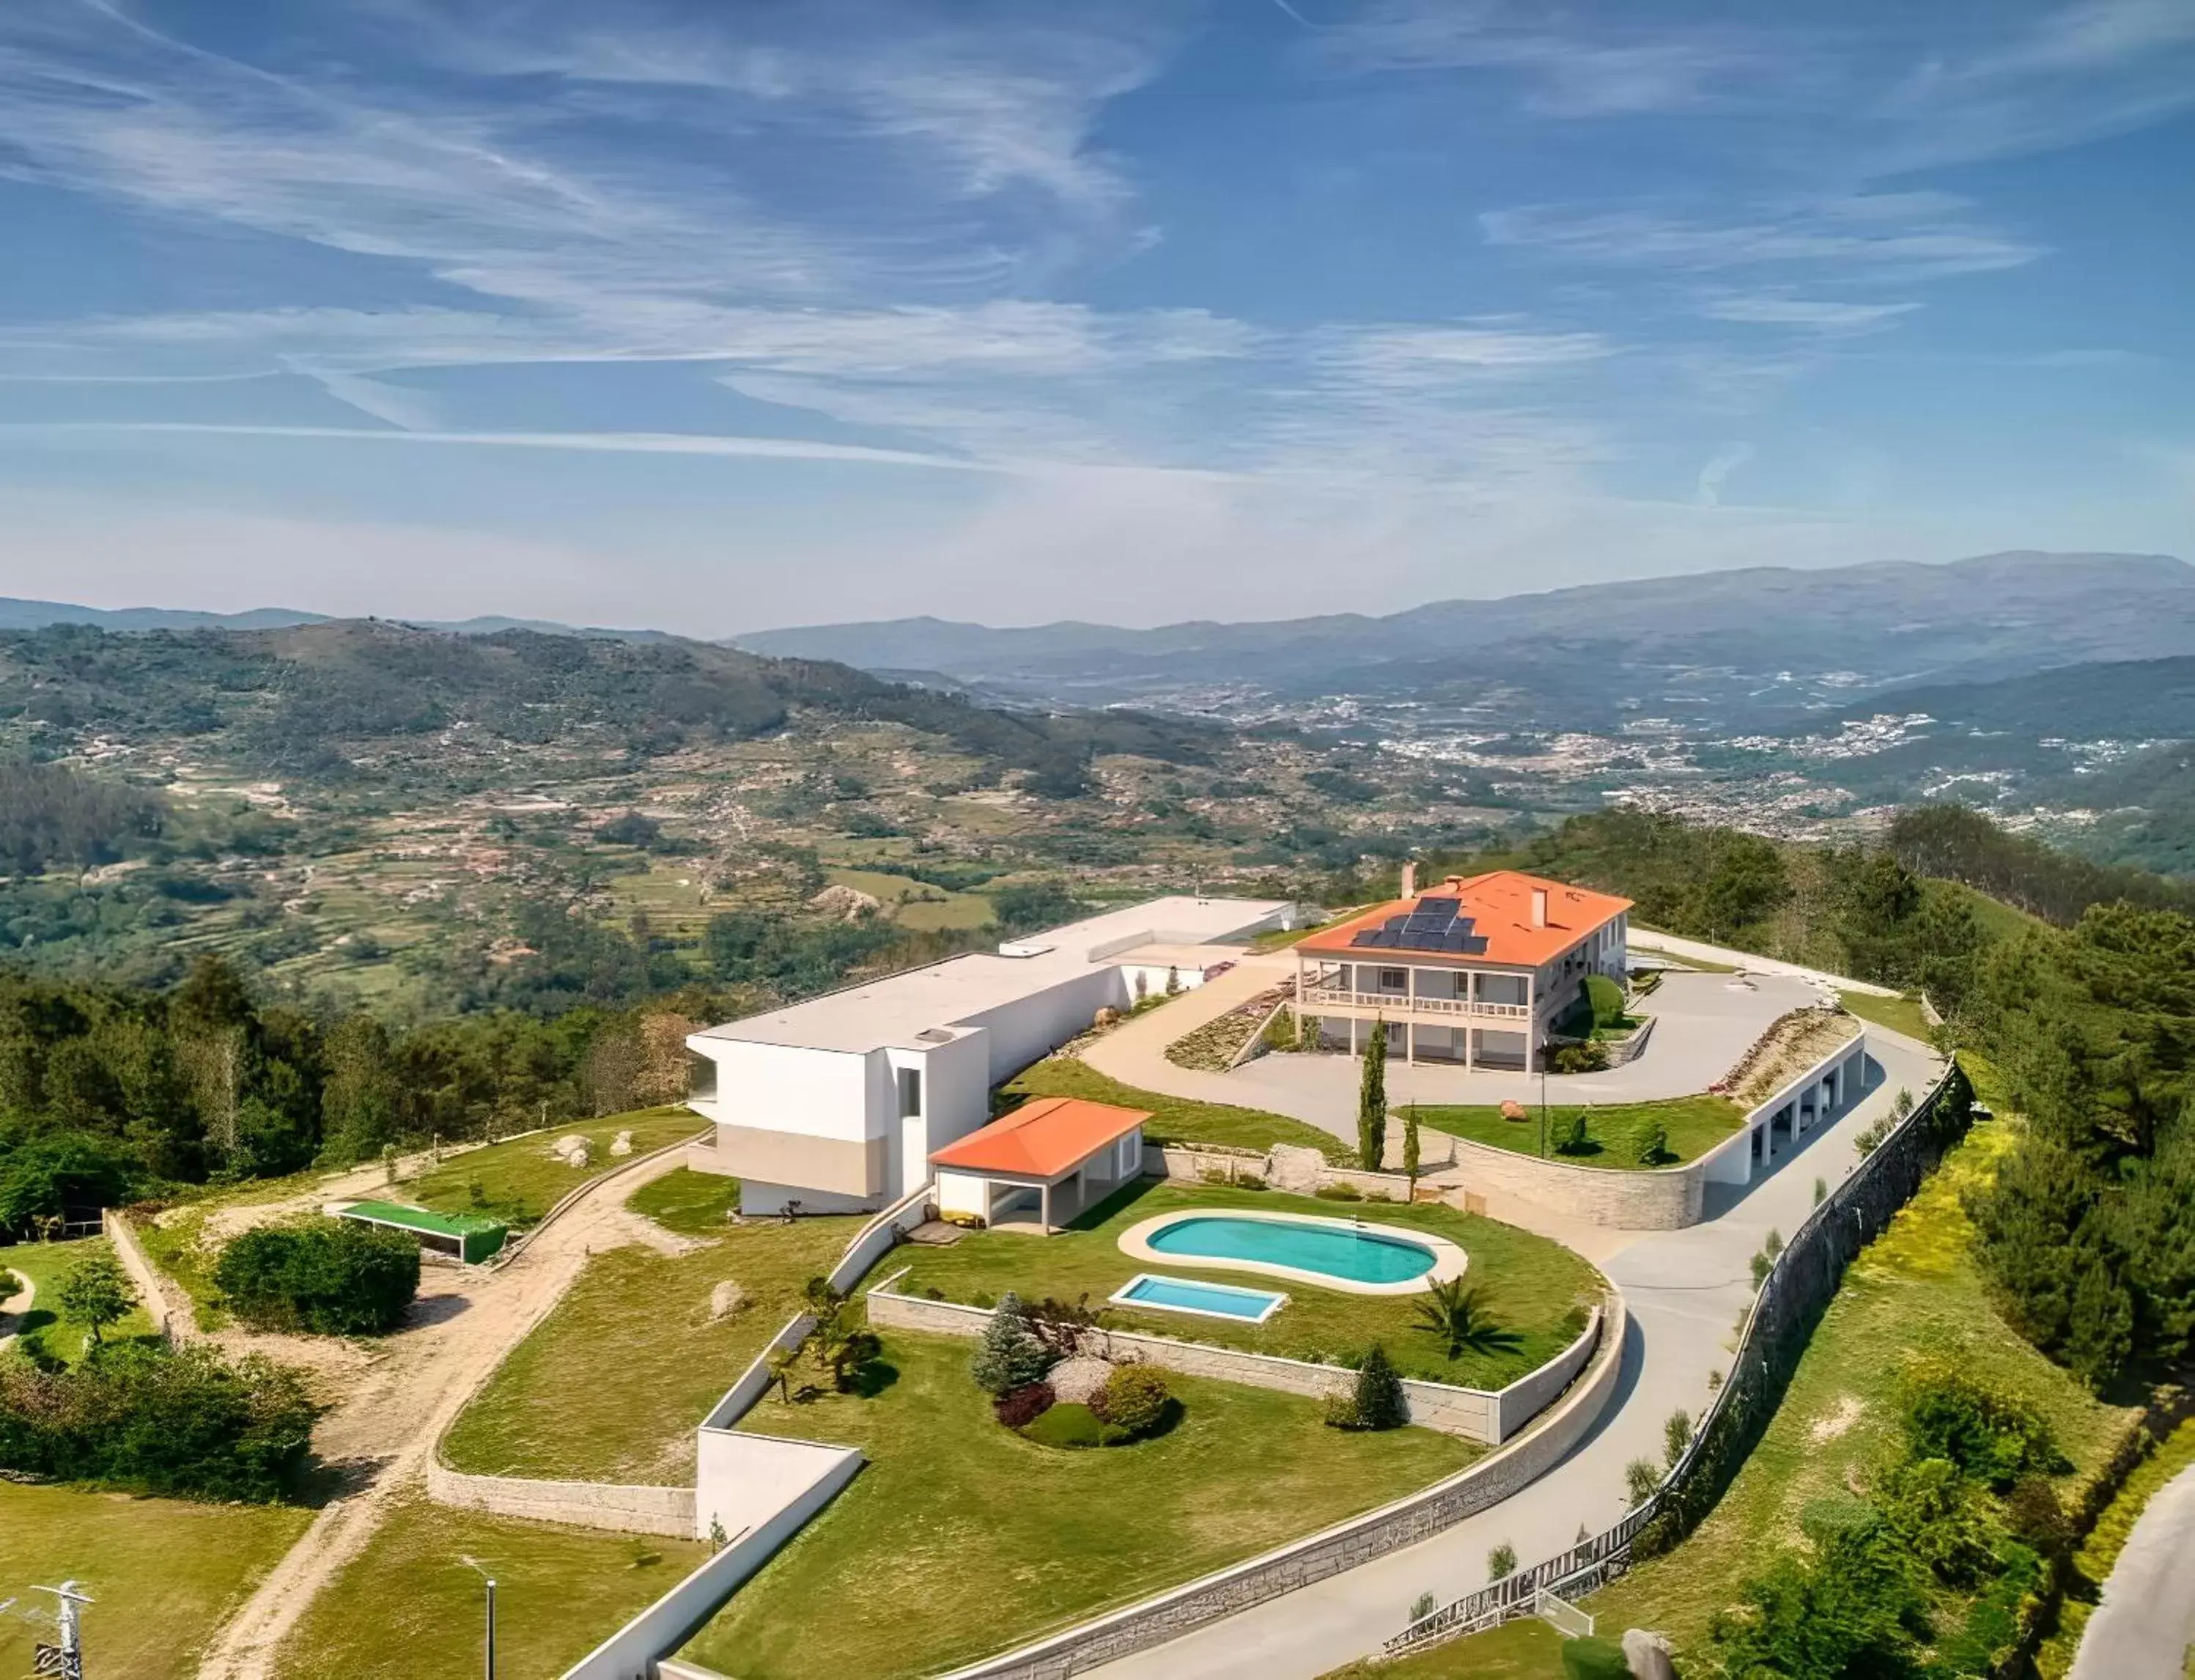 Property building, Bird's-eye View in Hotel Cotto do Gatto